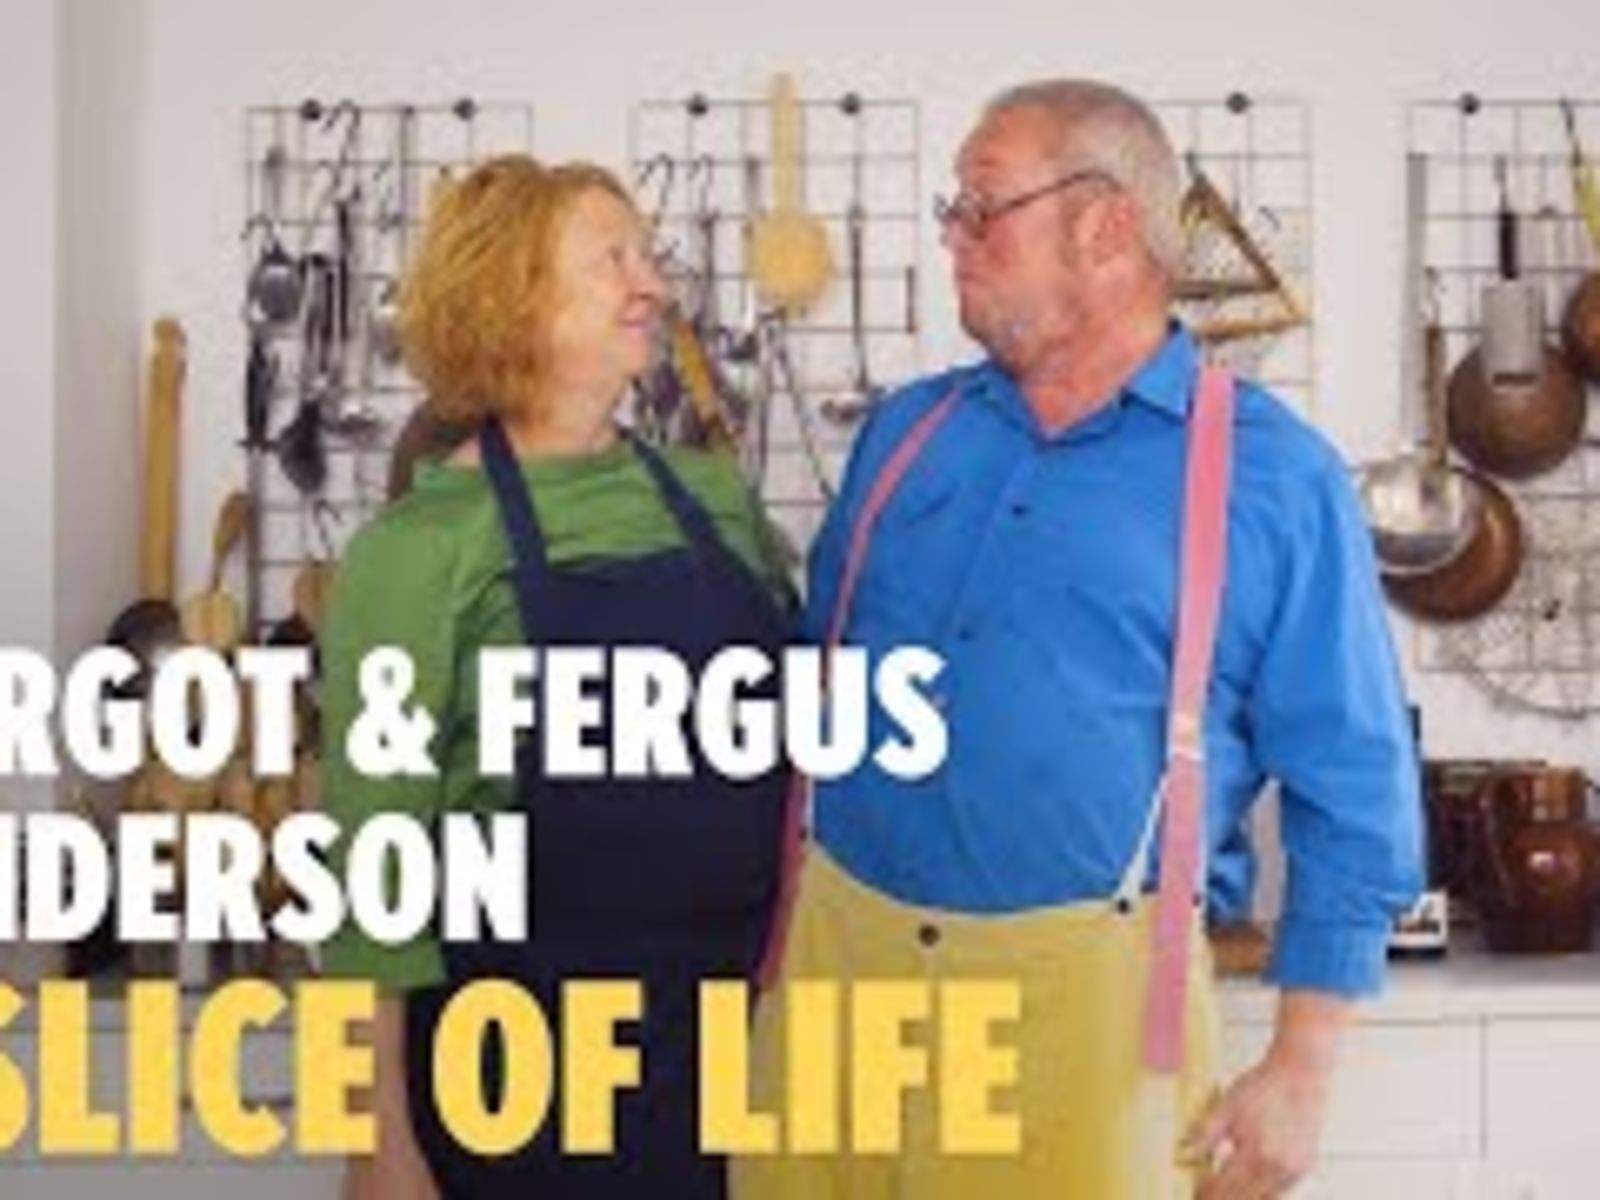 Margot & Fergus Henderson cook a fish pie at home | A Slice of Life | House & Garden